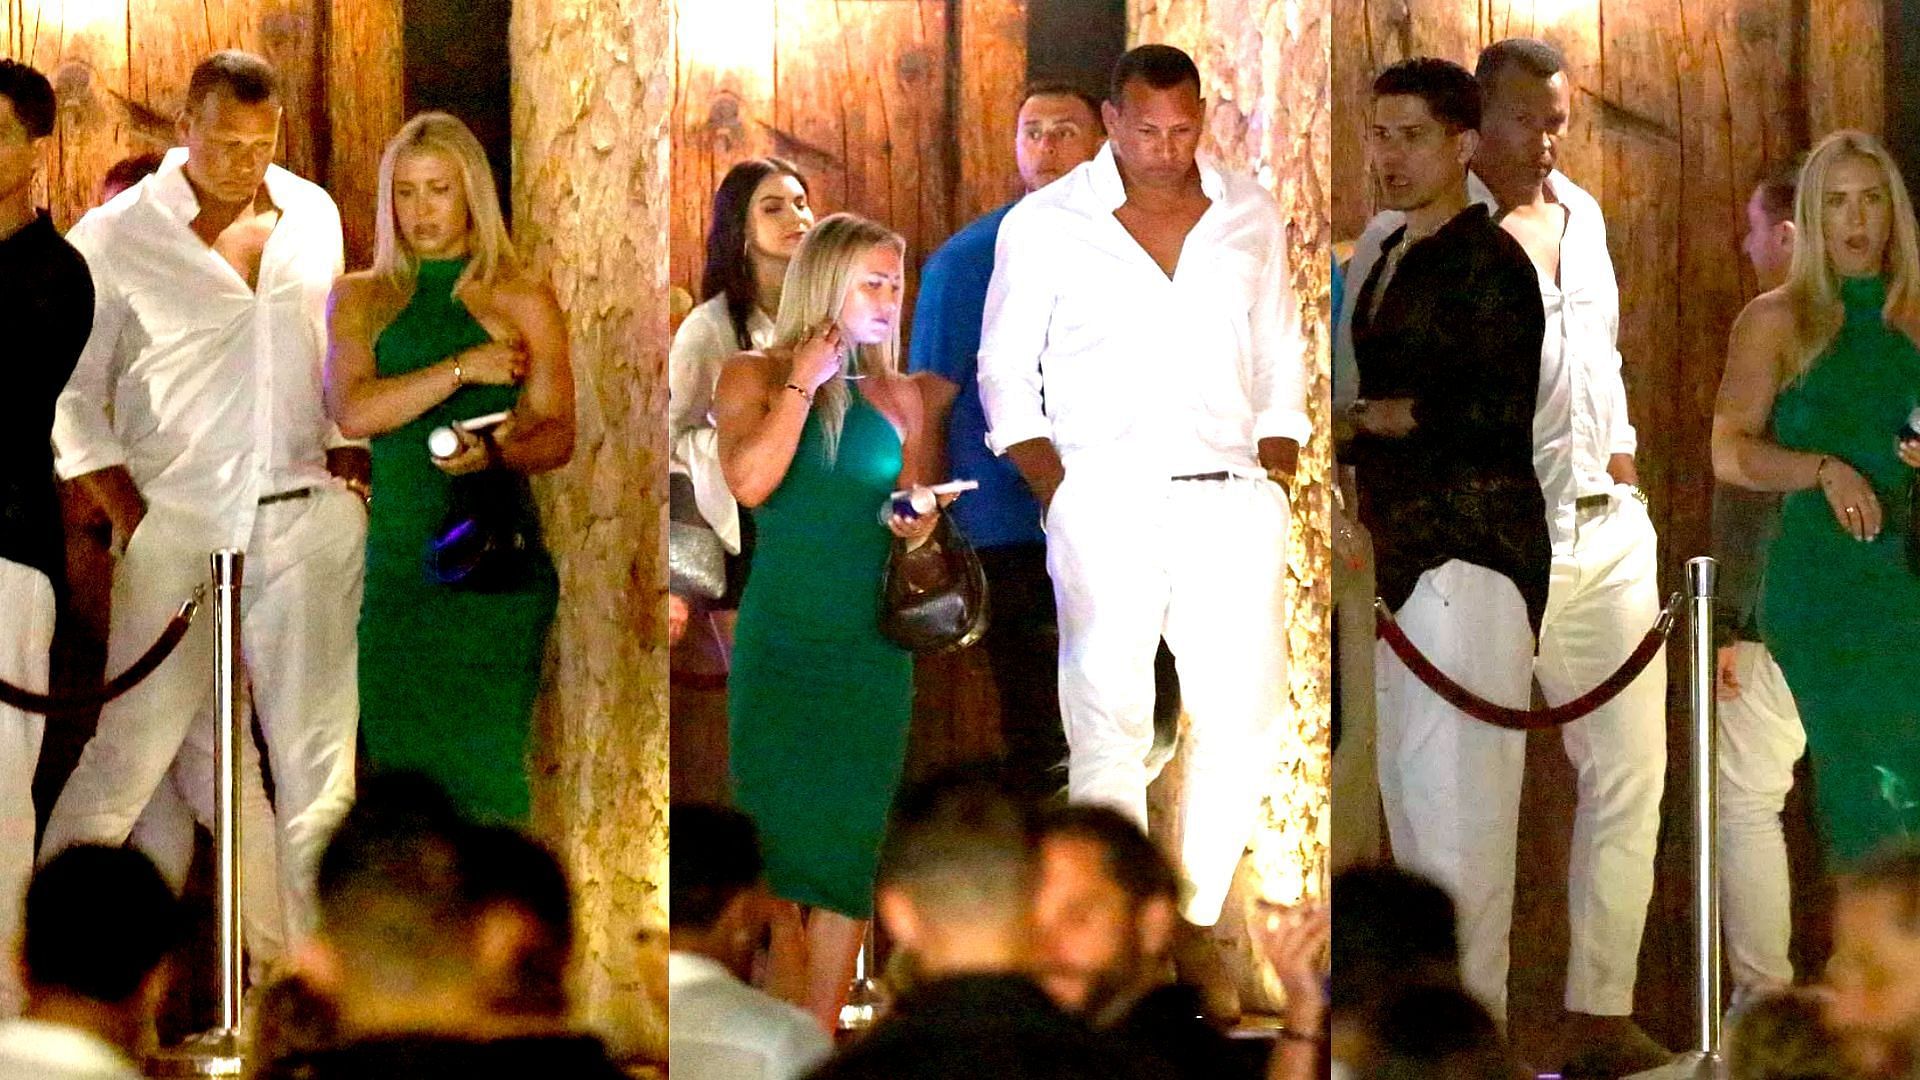 A-Rod was spotted leaving a nightclub in Spain with his girlfriend, Kathryne Padgett. (Source: Daily Mail)